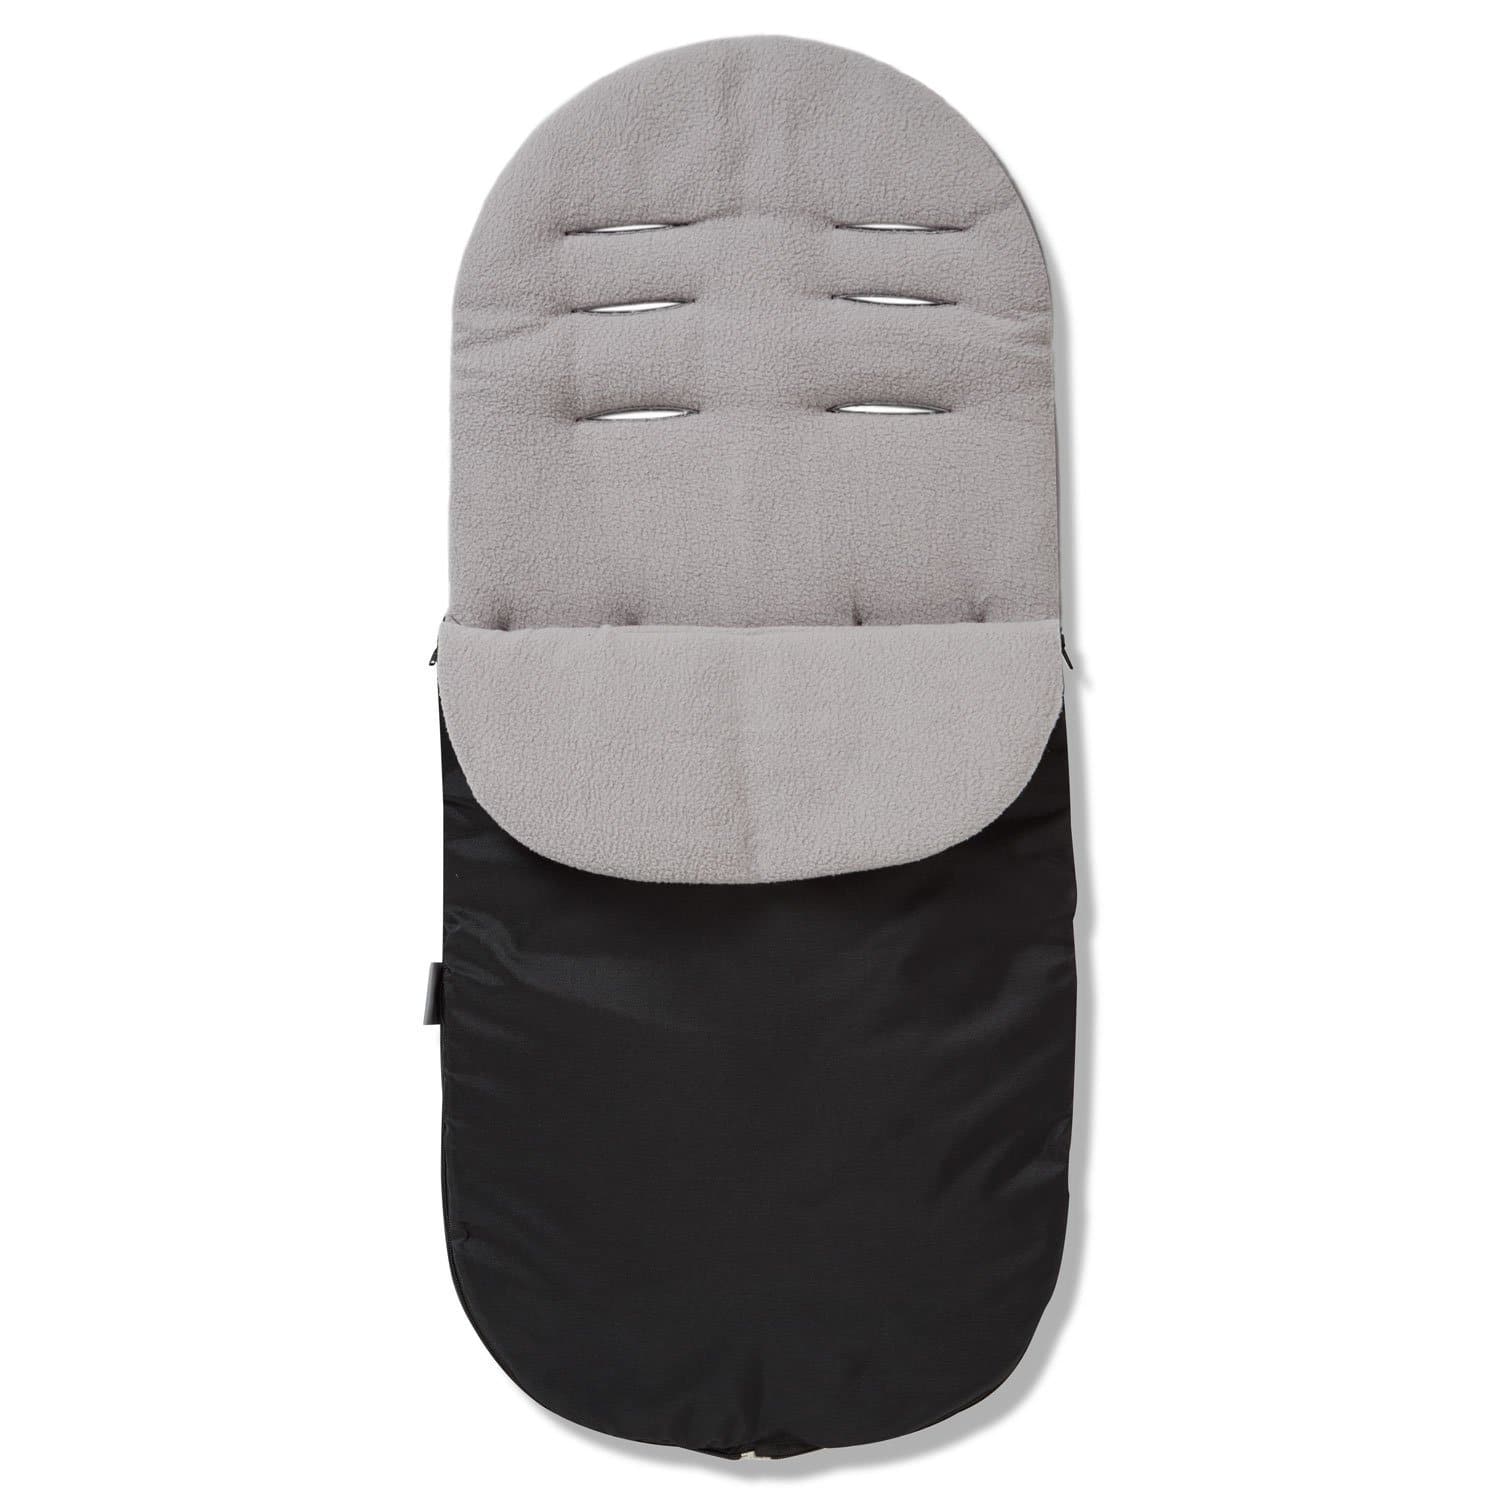 Footmuff / Cosy Toes Compatible with Egg - Grey / Fits All Models | For Your Little One